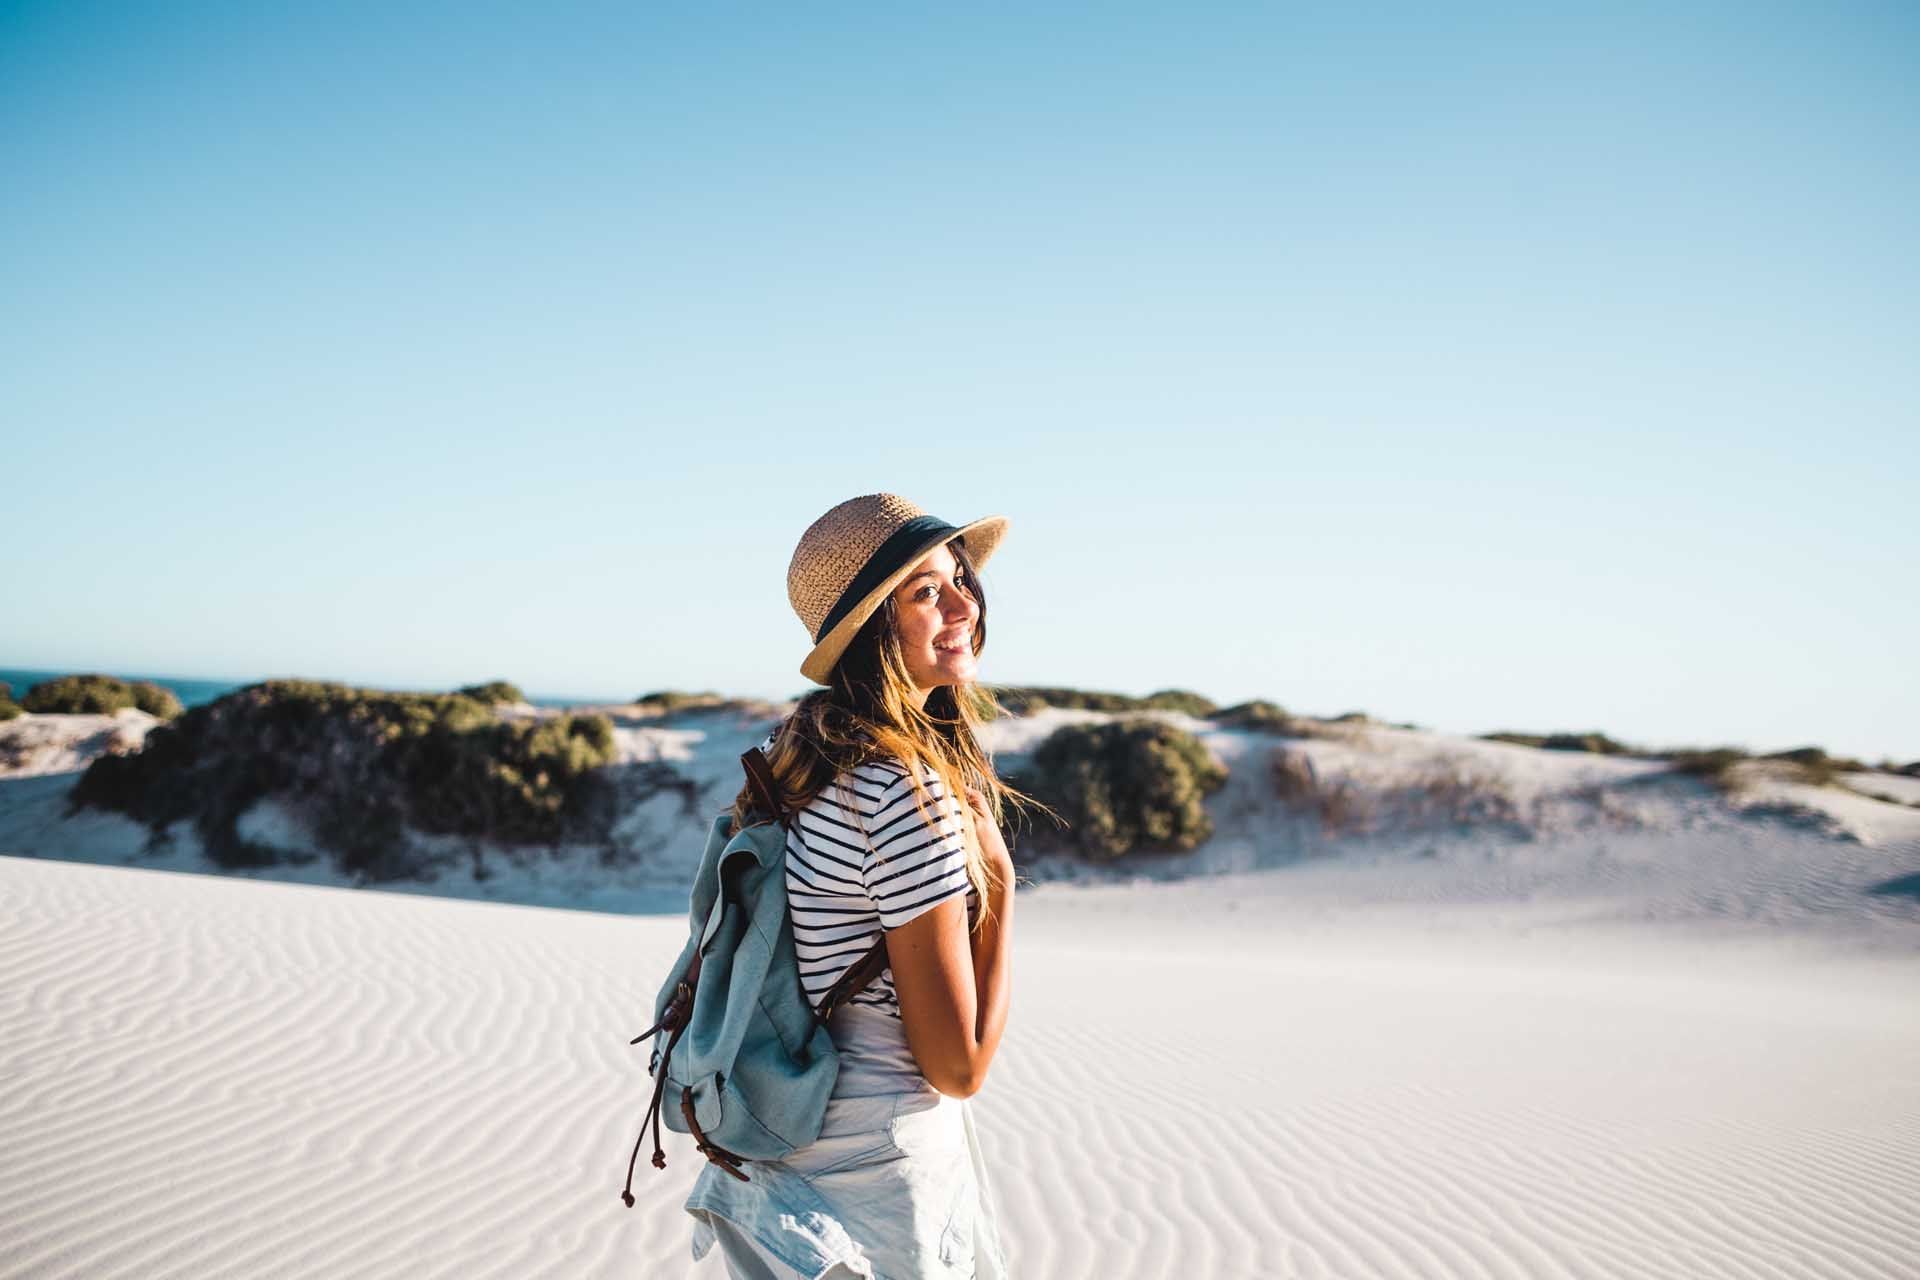 Solo Female Travel: Essential Safety Tips